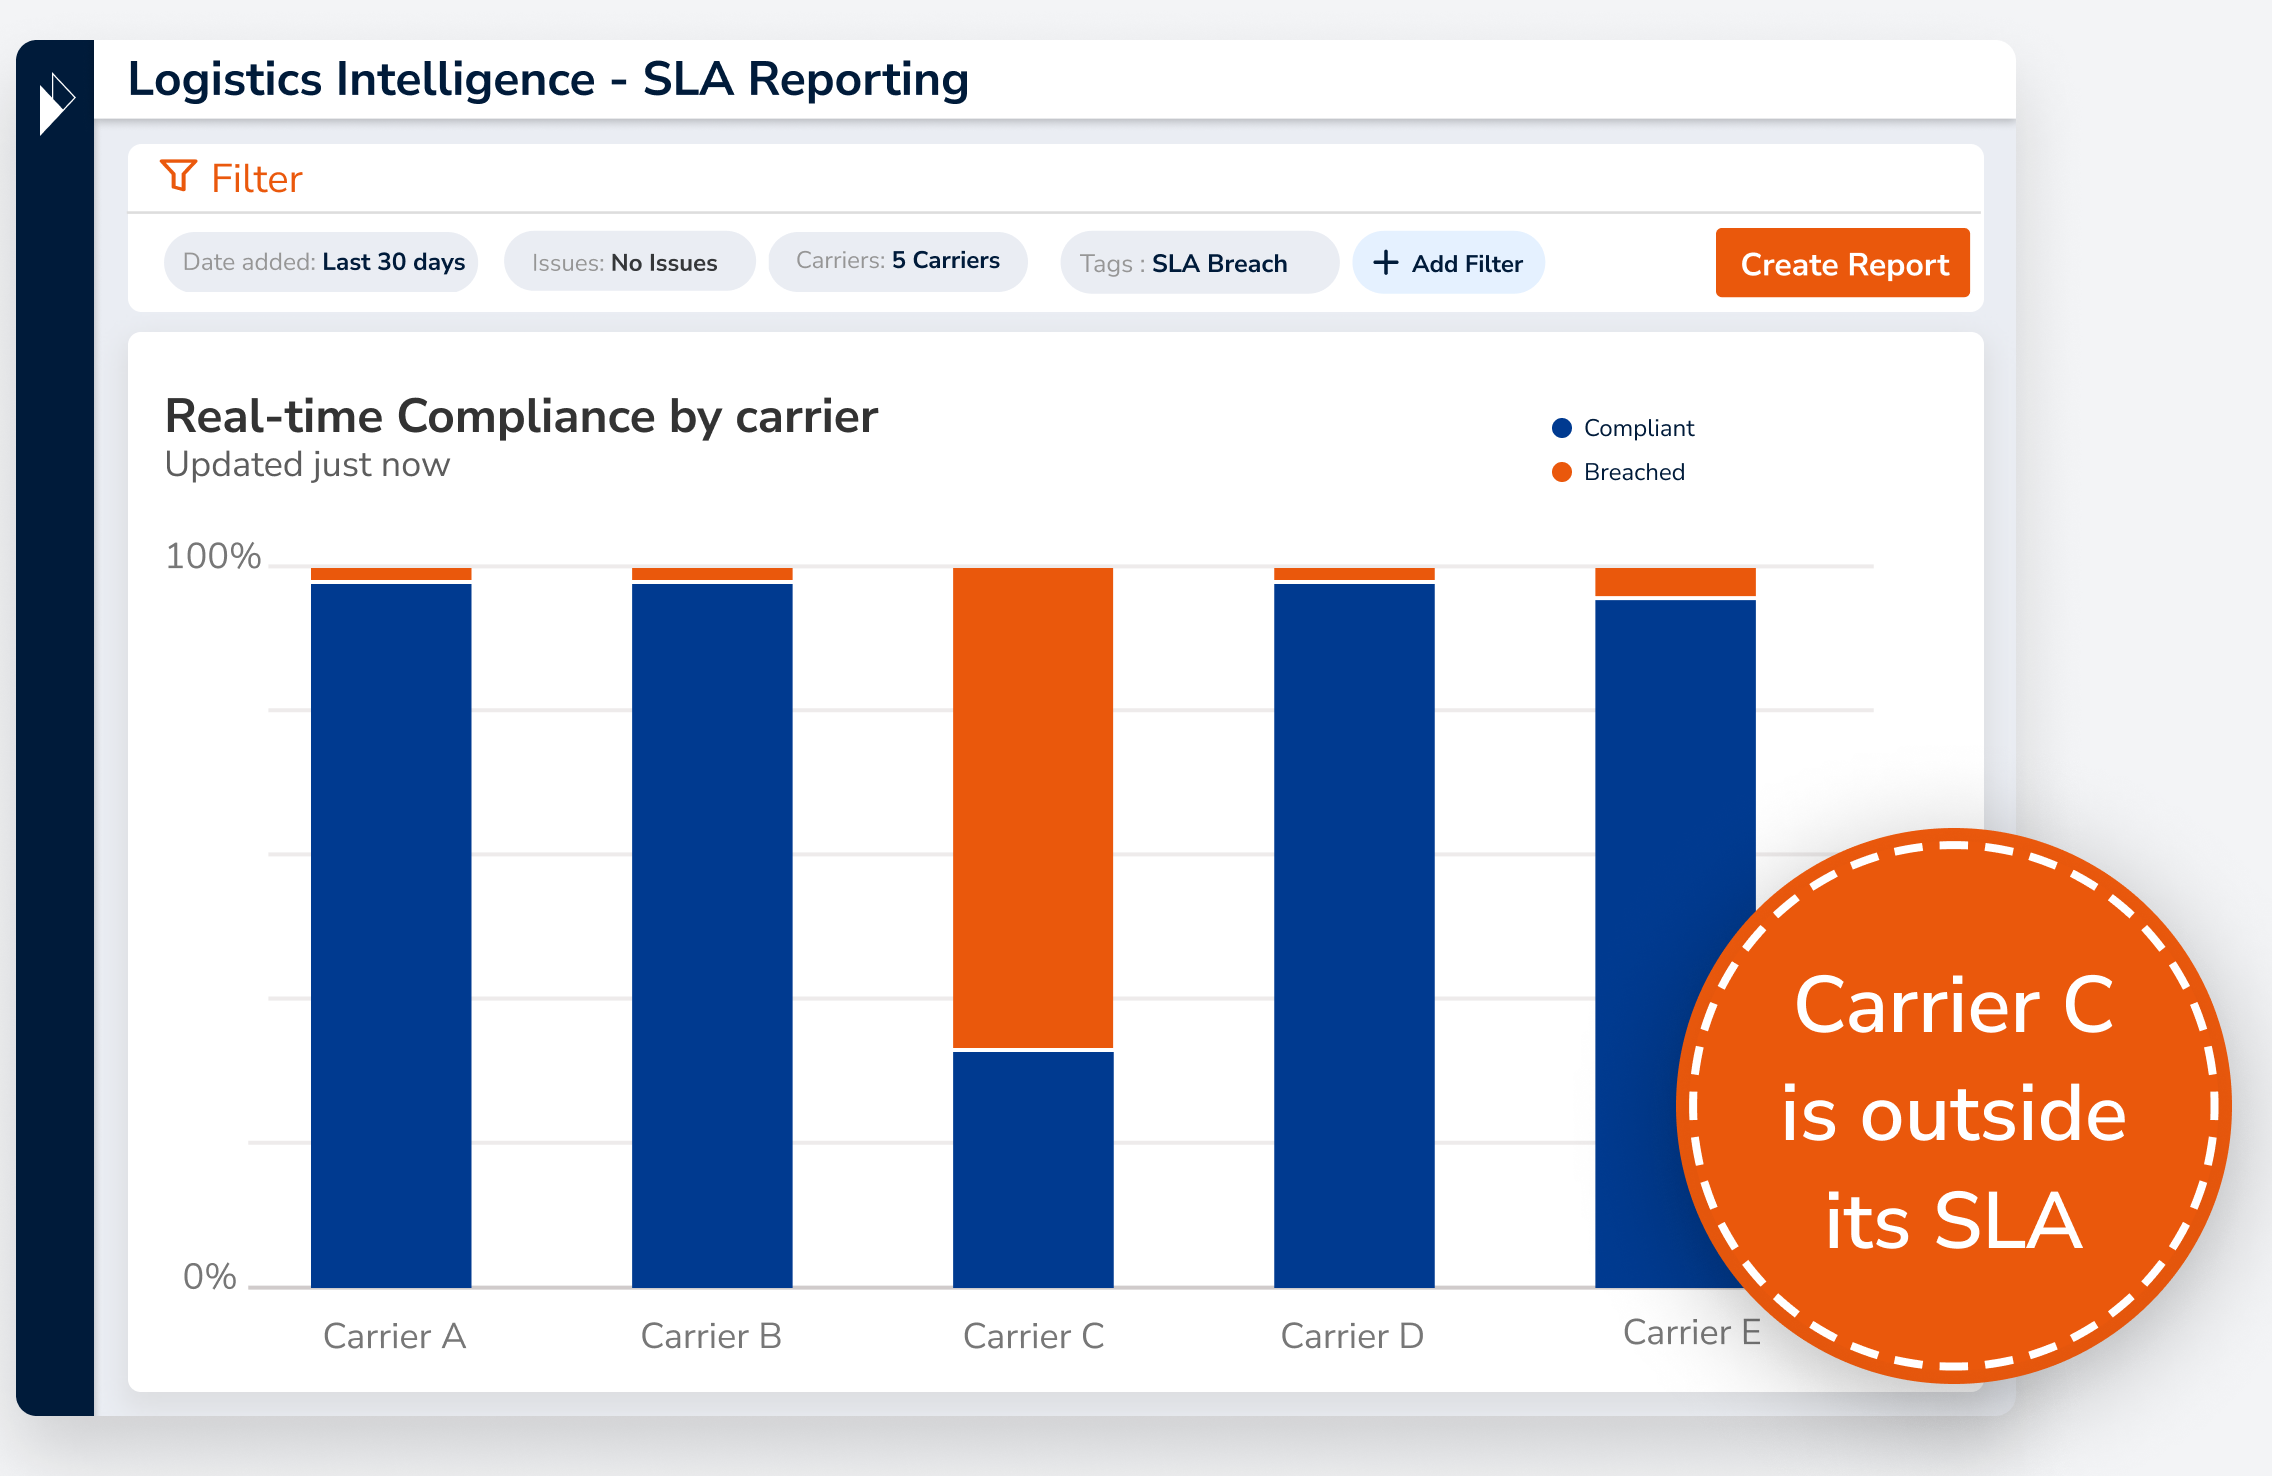 Parcel Perform logistics intelligence page showing a bar graph of real-time SLA compliance of each carrier.